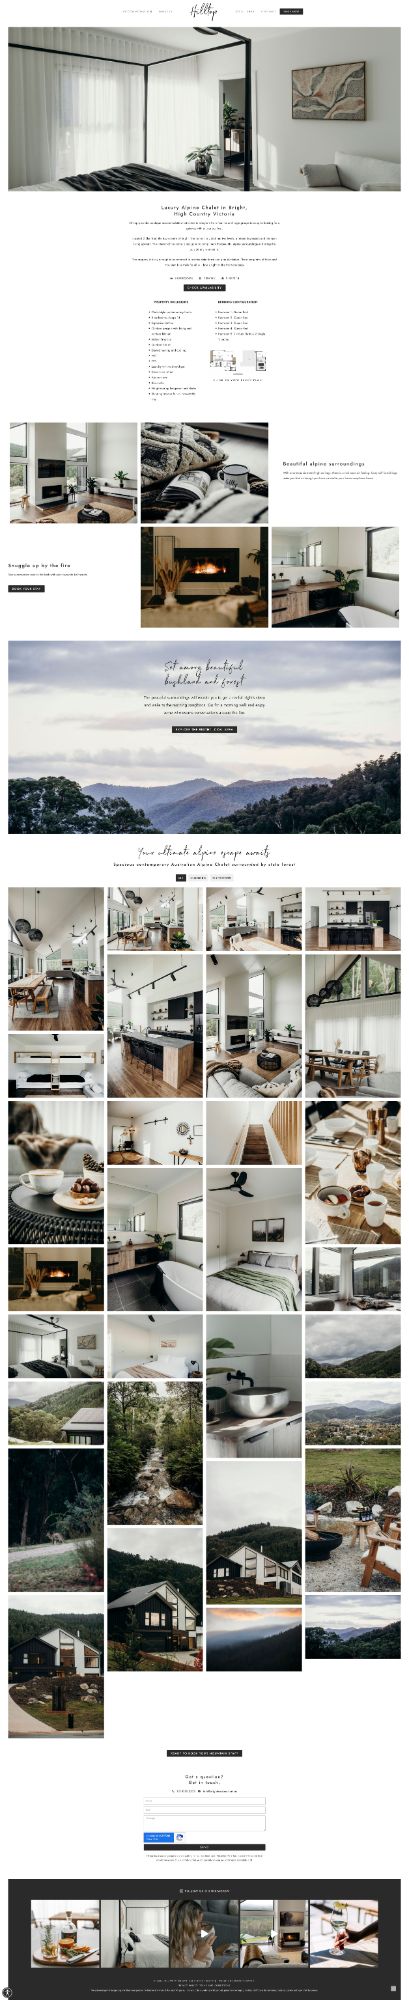 web design holiday home bright airbnb